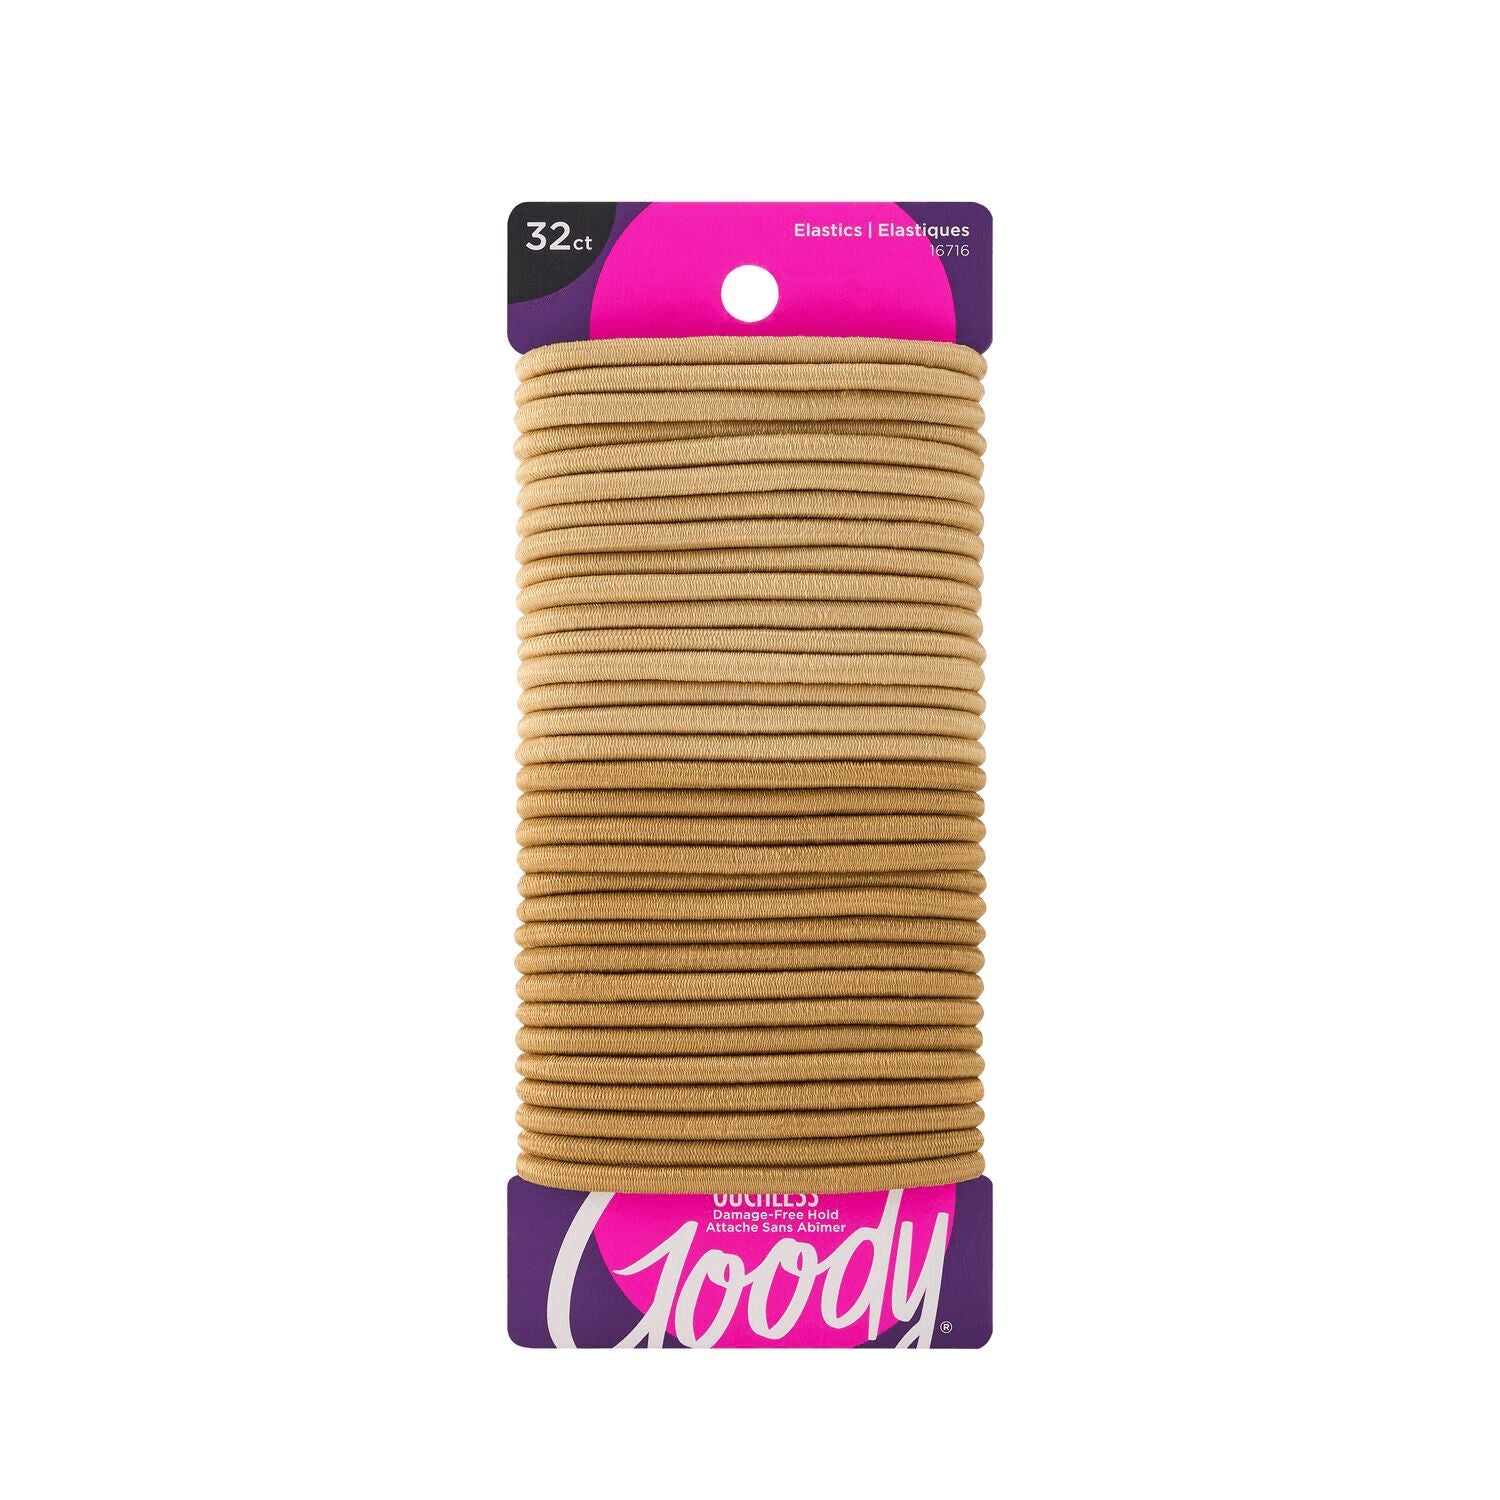 1399  by   Goody Ouchless Blonde Elastics 32 Count